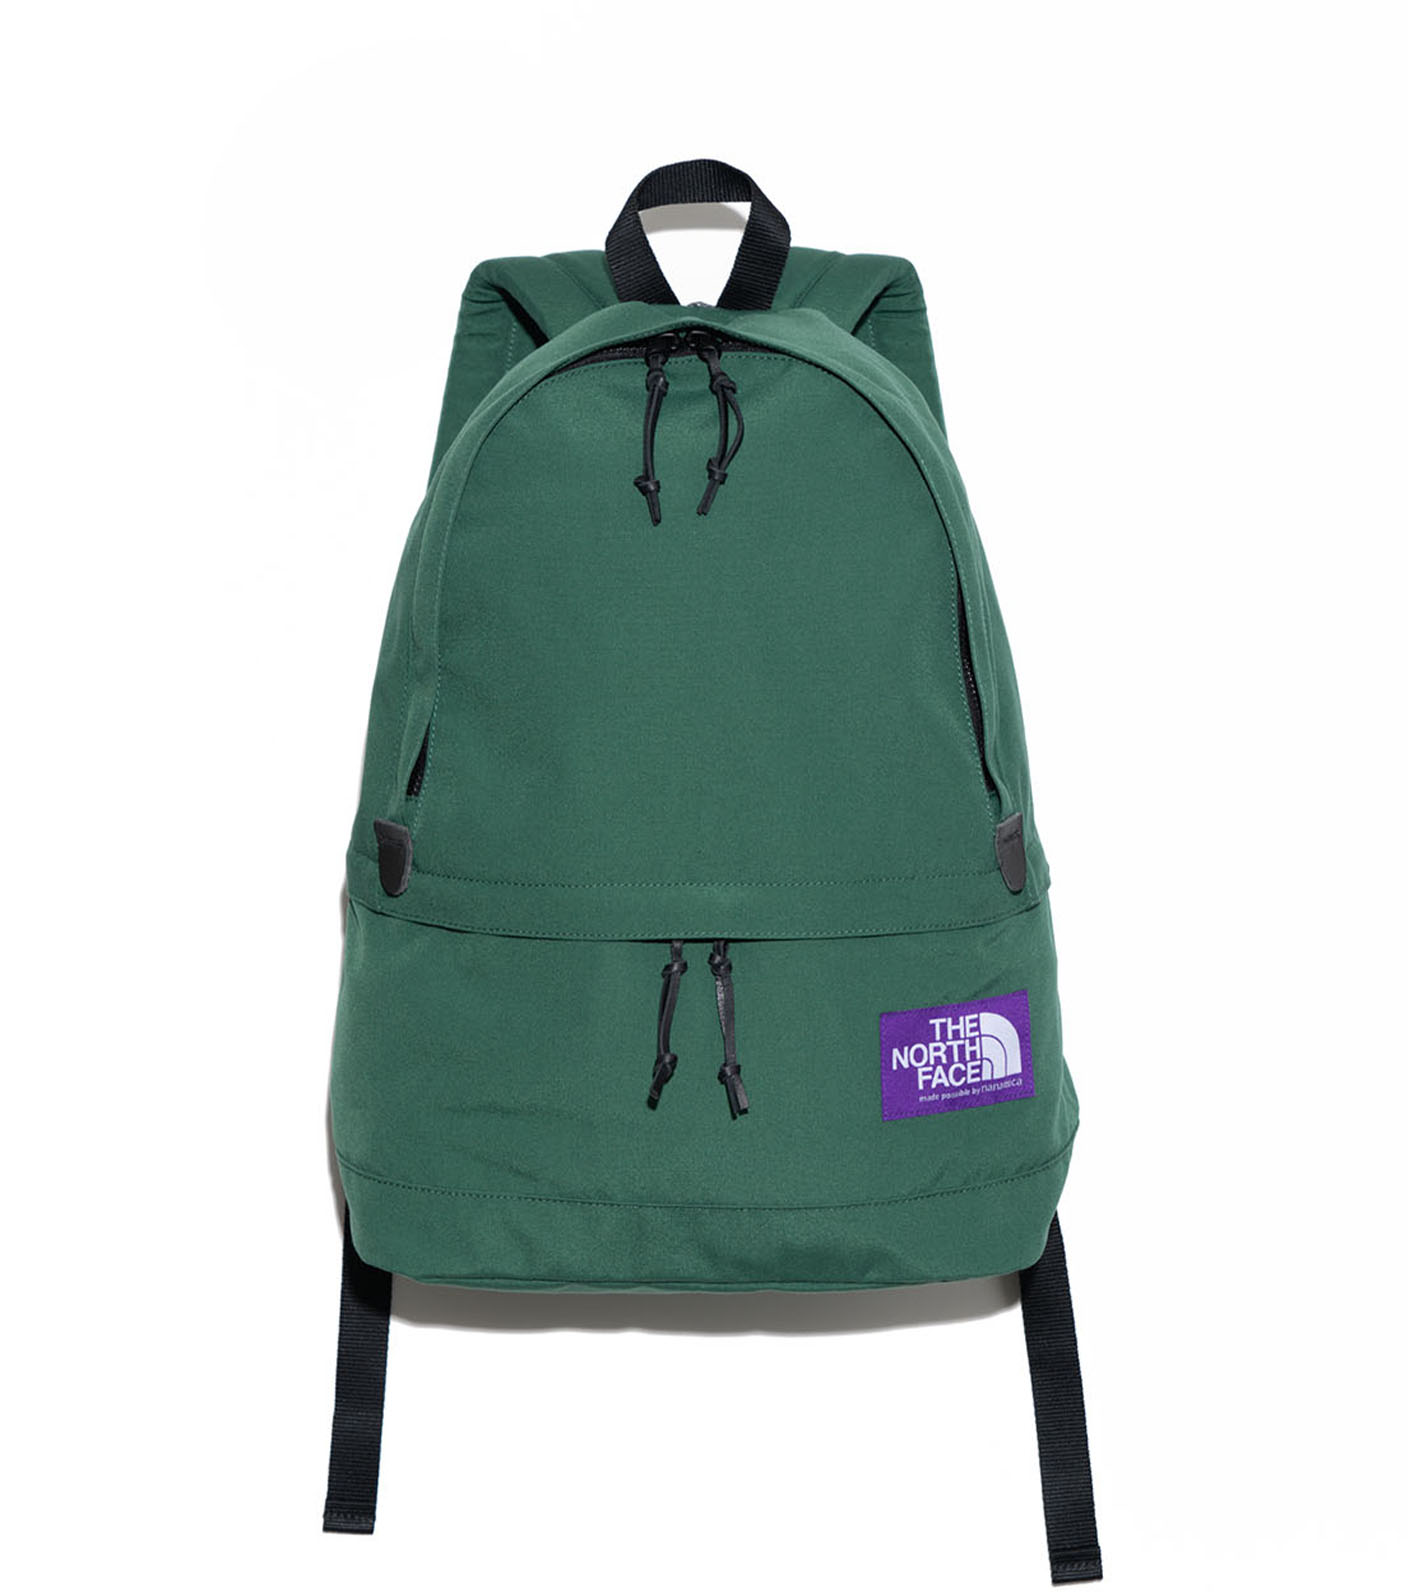 THE NORTH FACE Field Day Pack 新品タグ付き | camillevieraservices.com